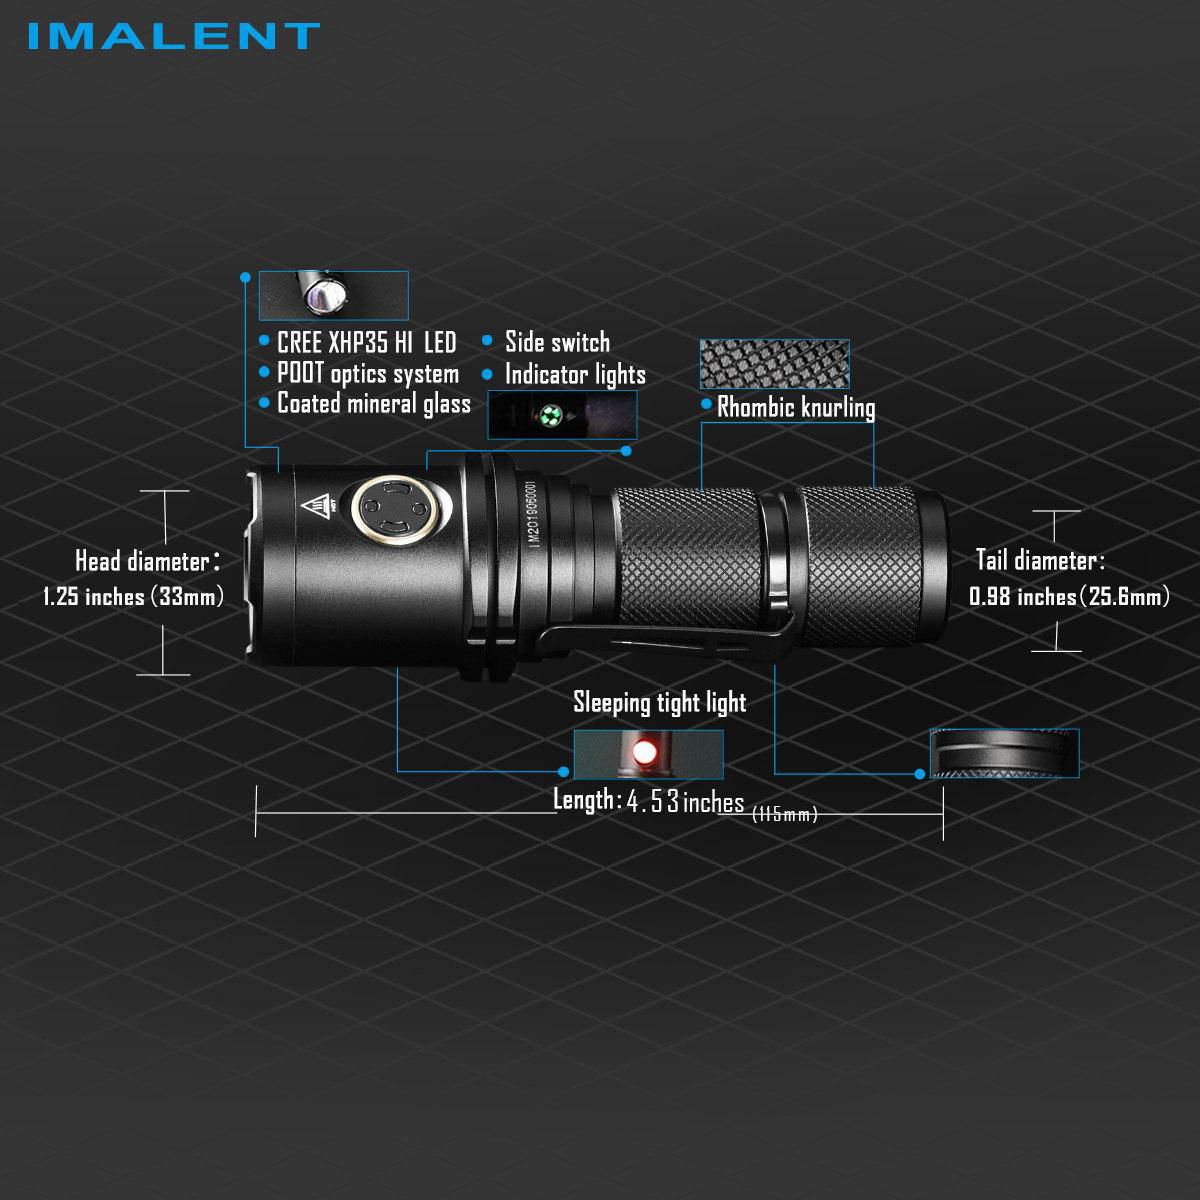 Imalent DM35 LED flashlight 2000LM and 450meters beamdistance